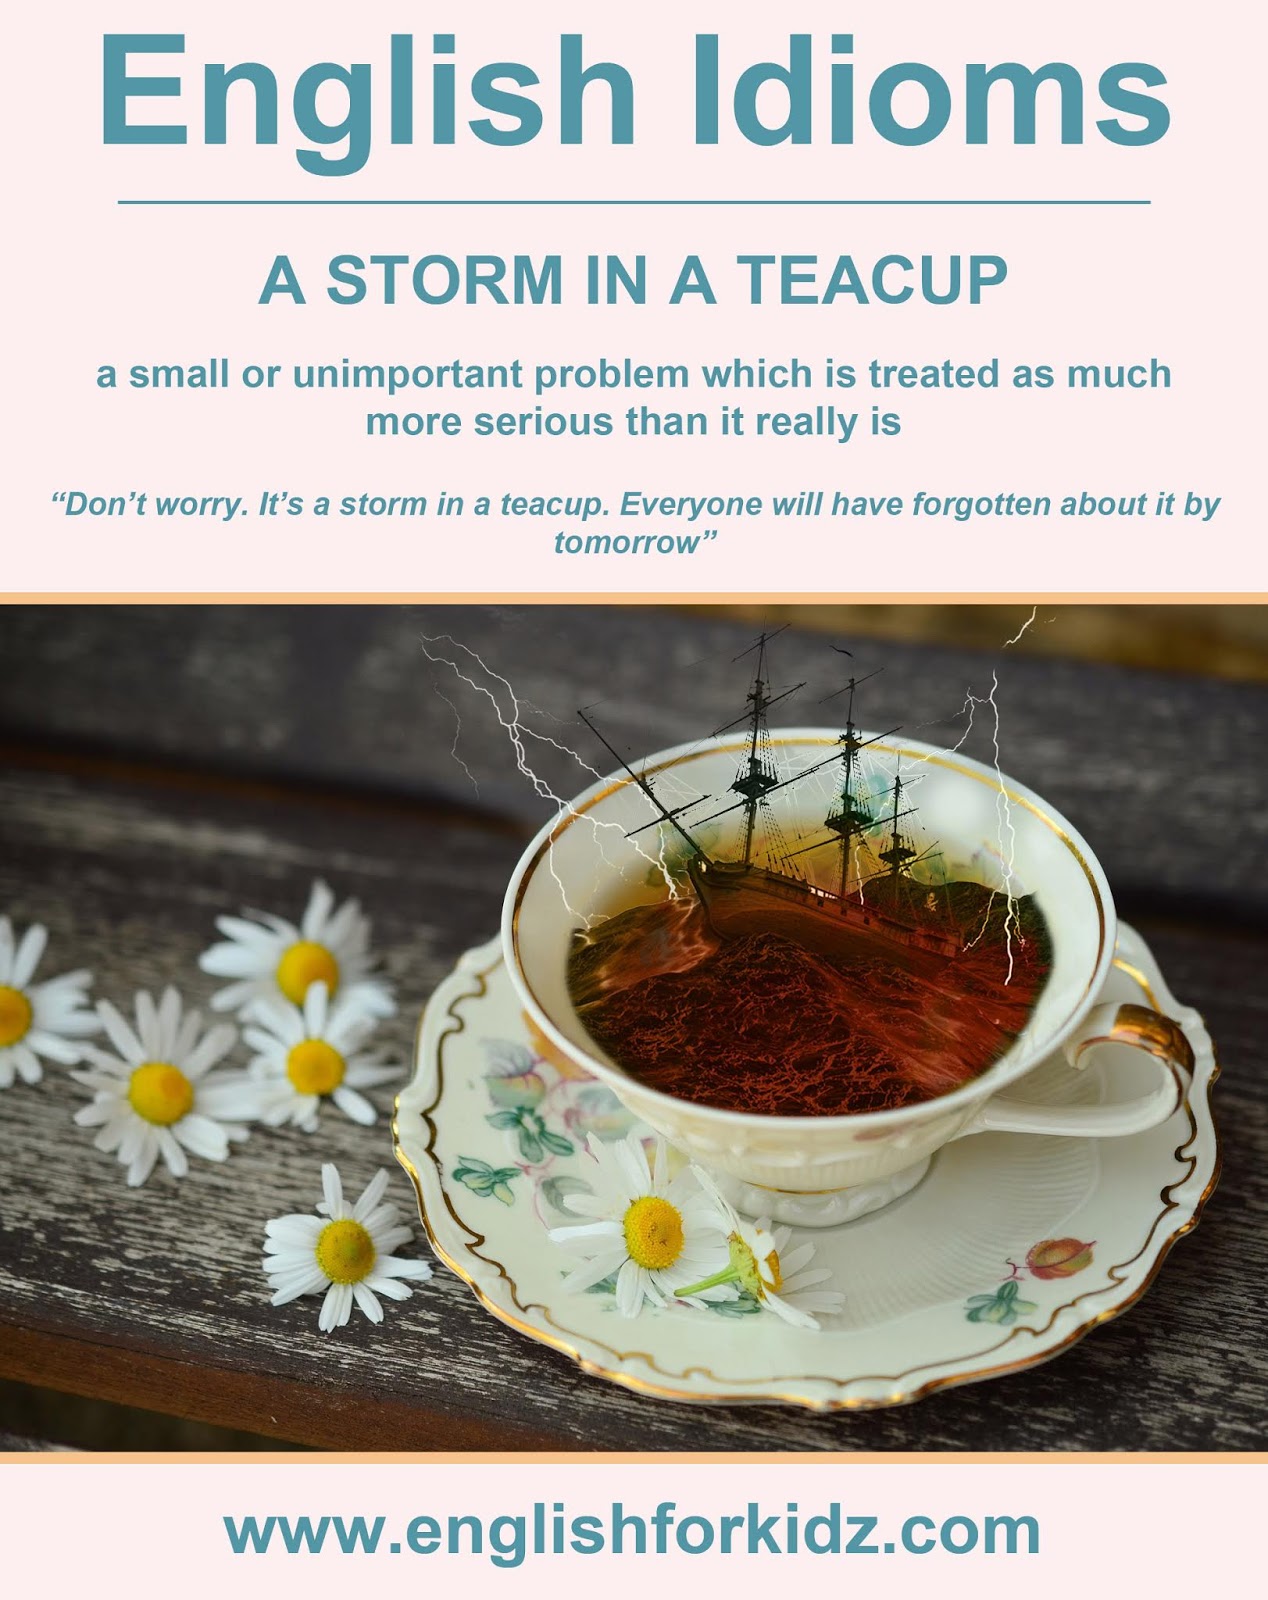 English idiom picture - a storm in a teacup